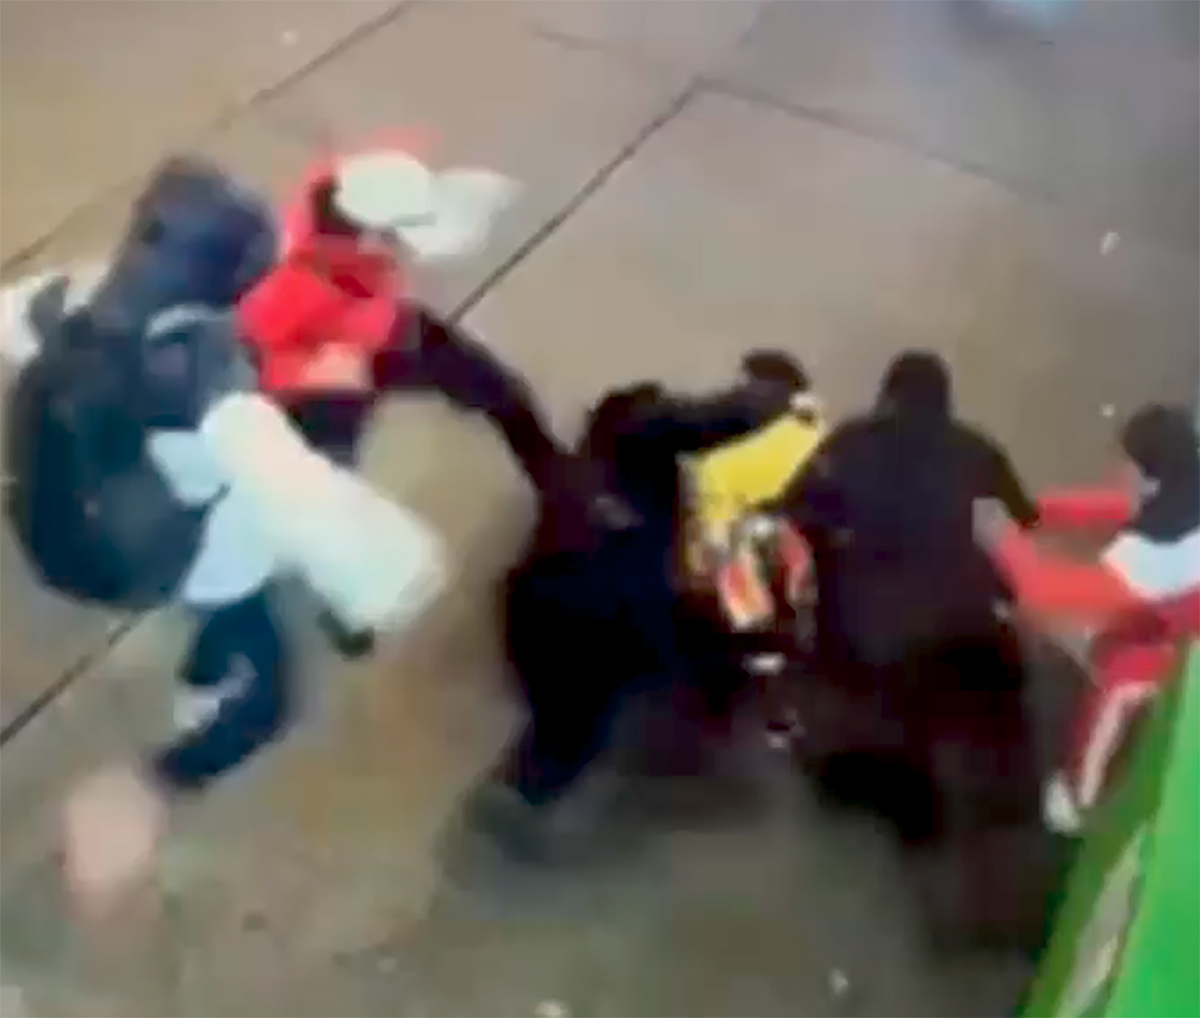 The NYPD is looking for a group of males who punched and kicked officers as they tried to make an arrest in the Theatre District. -Photo by NYPD